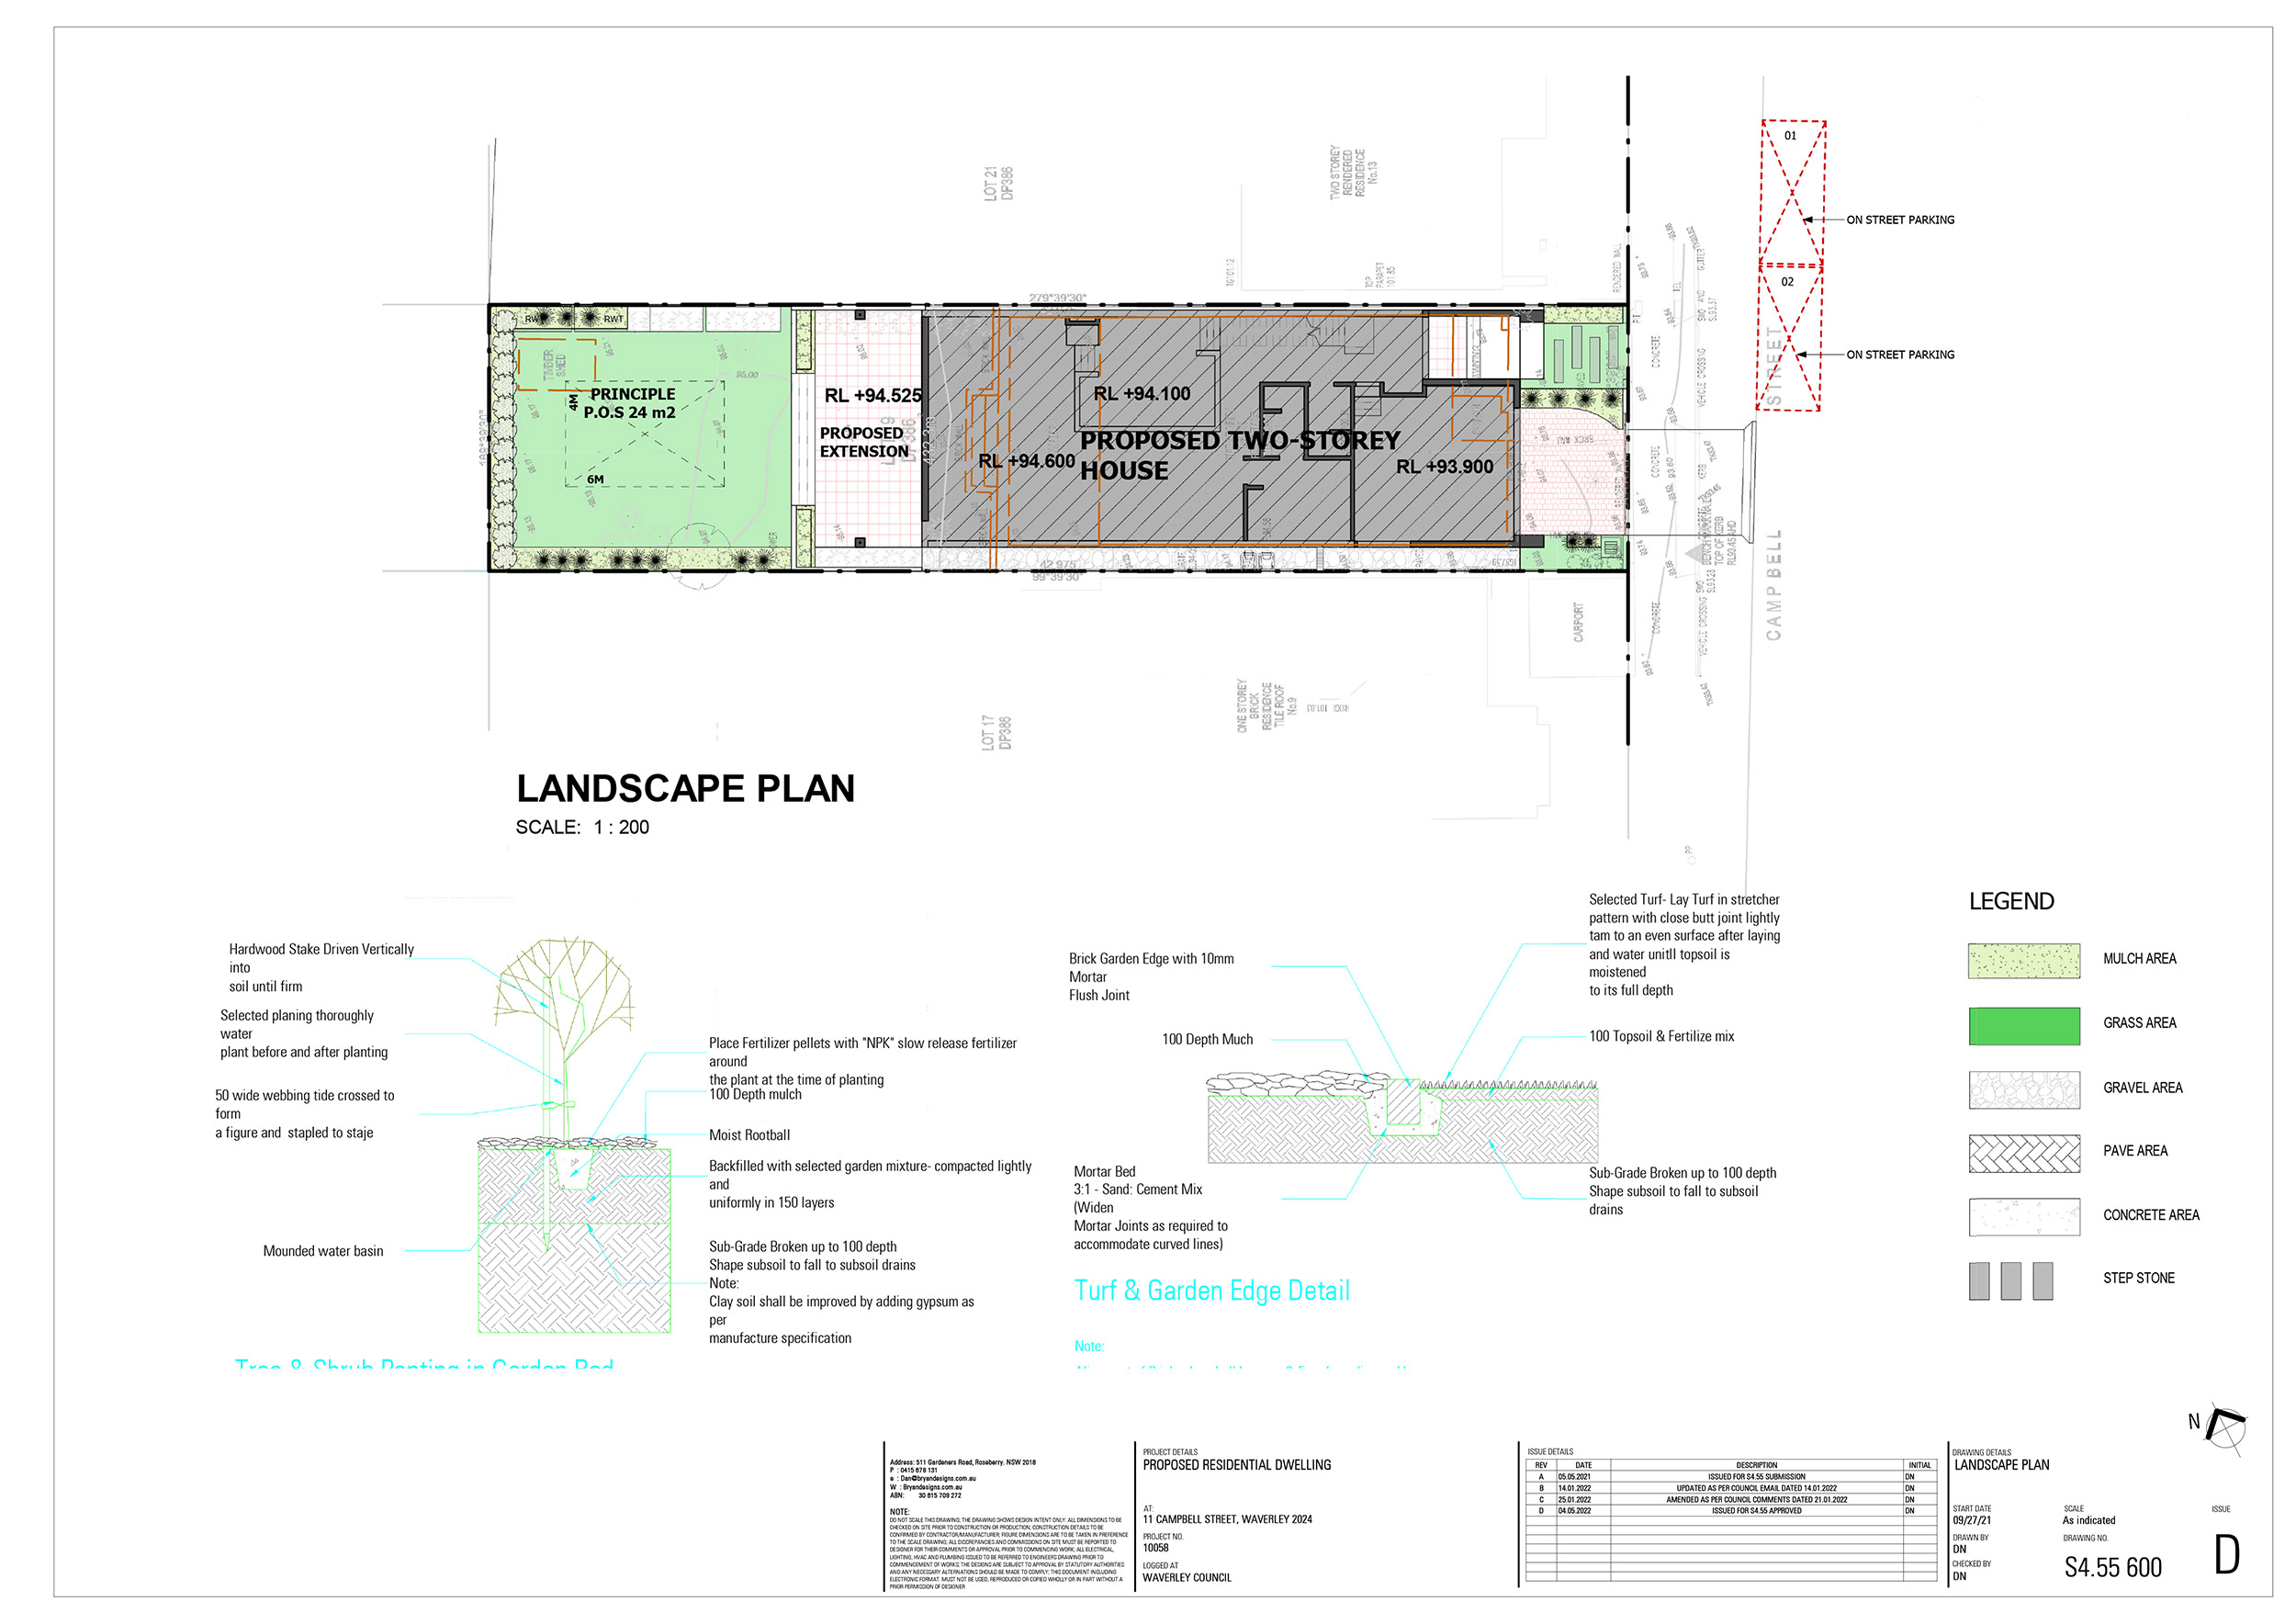 Landscape Plan S4.55 Issue D Architectural Plbell Street Waverley 25.05.22 17